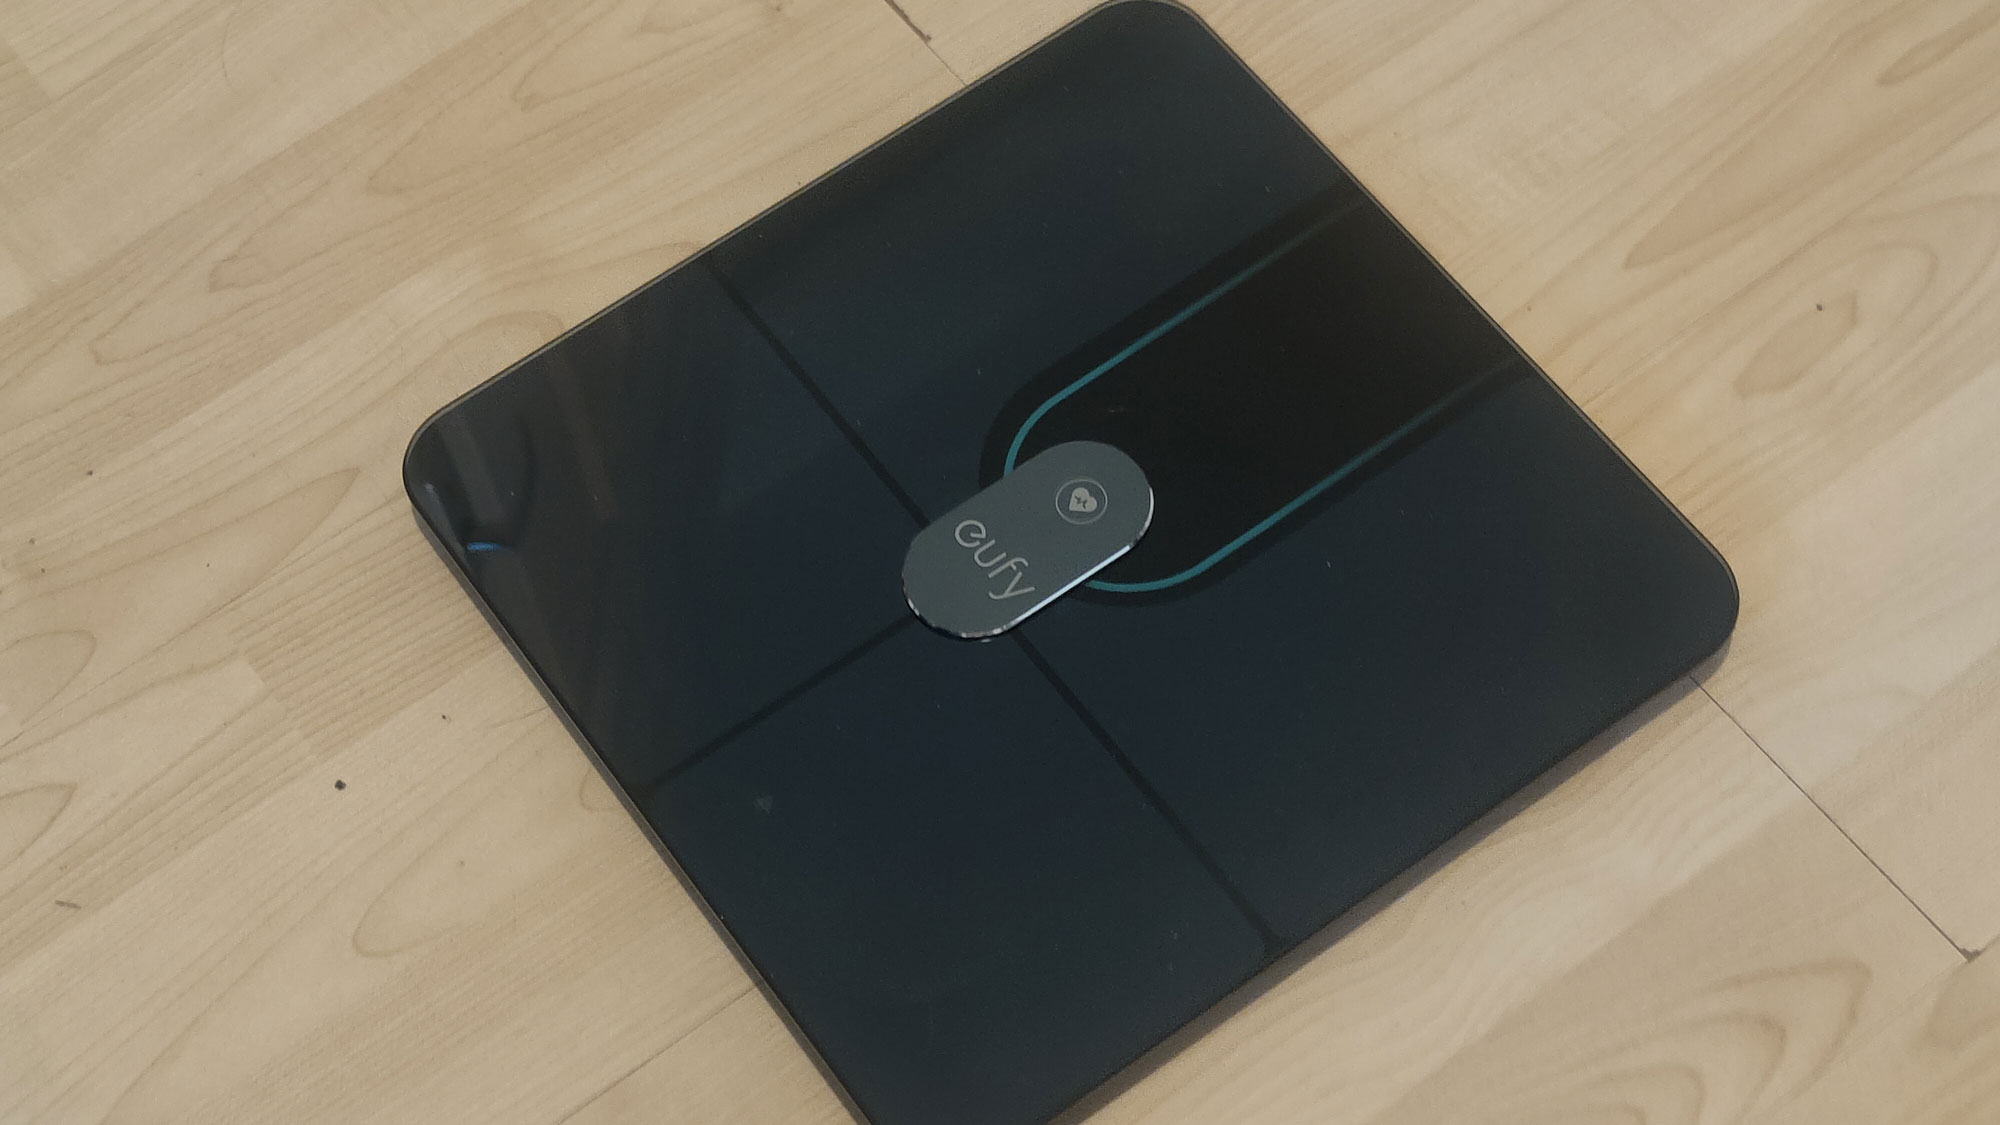 Eufy Smart Scale P2 Pro review: Watching your weight and your lifestyle